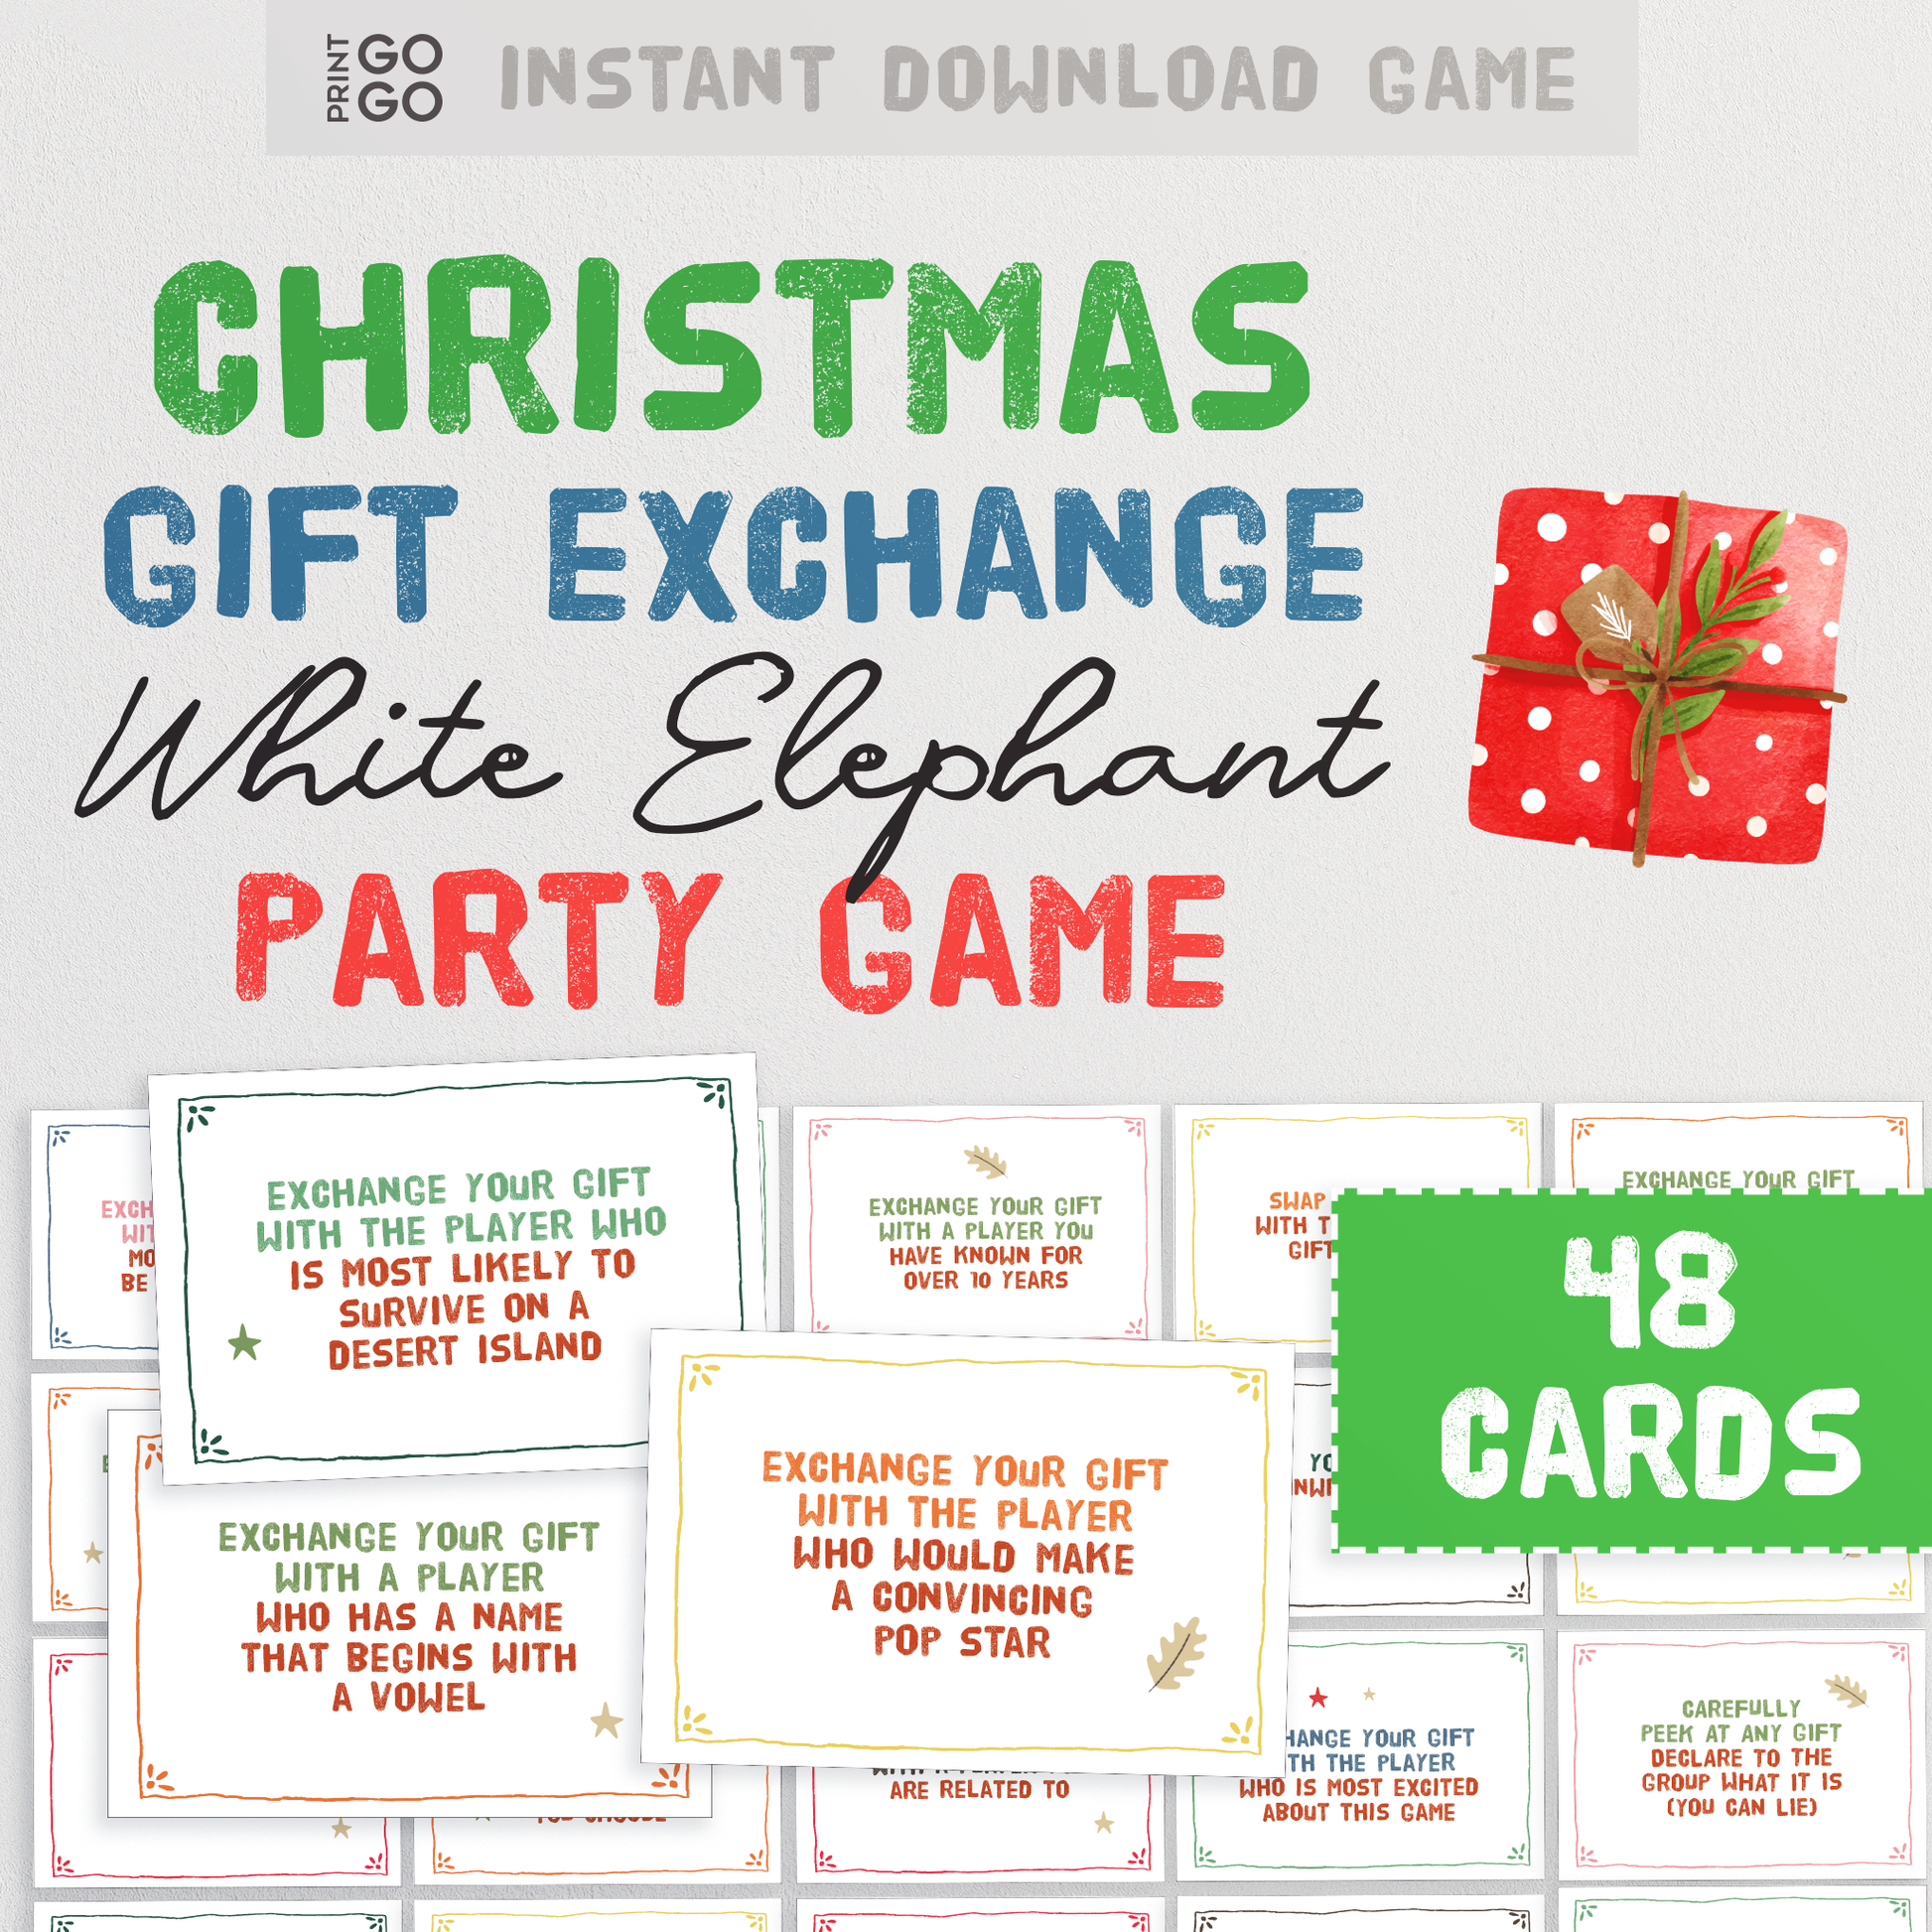 Christmas Gift Exchange Cards - The Hilarious White Elephant Party Game | Yankee Swap Gift Exchange Cards | Holiday Present Swap Party Game